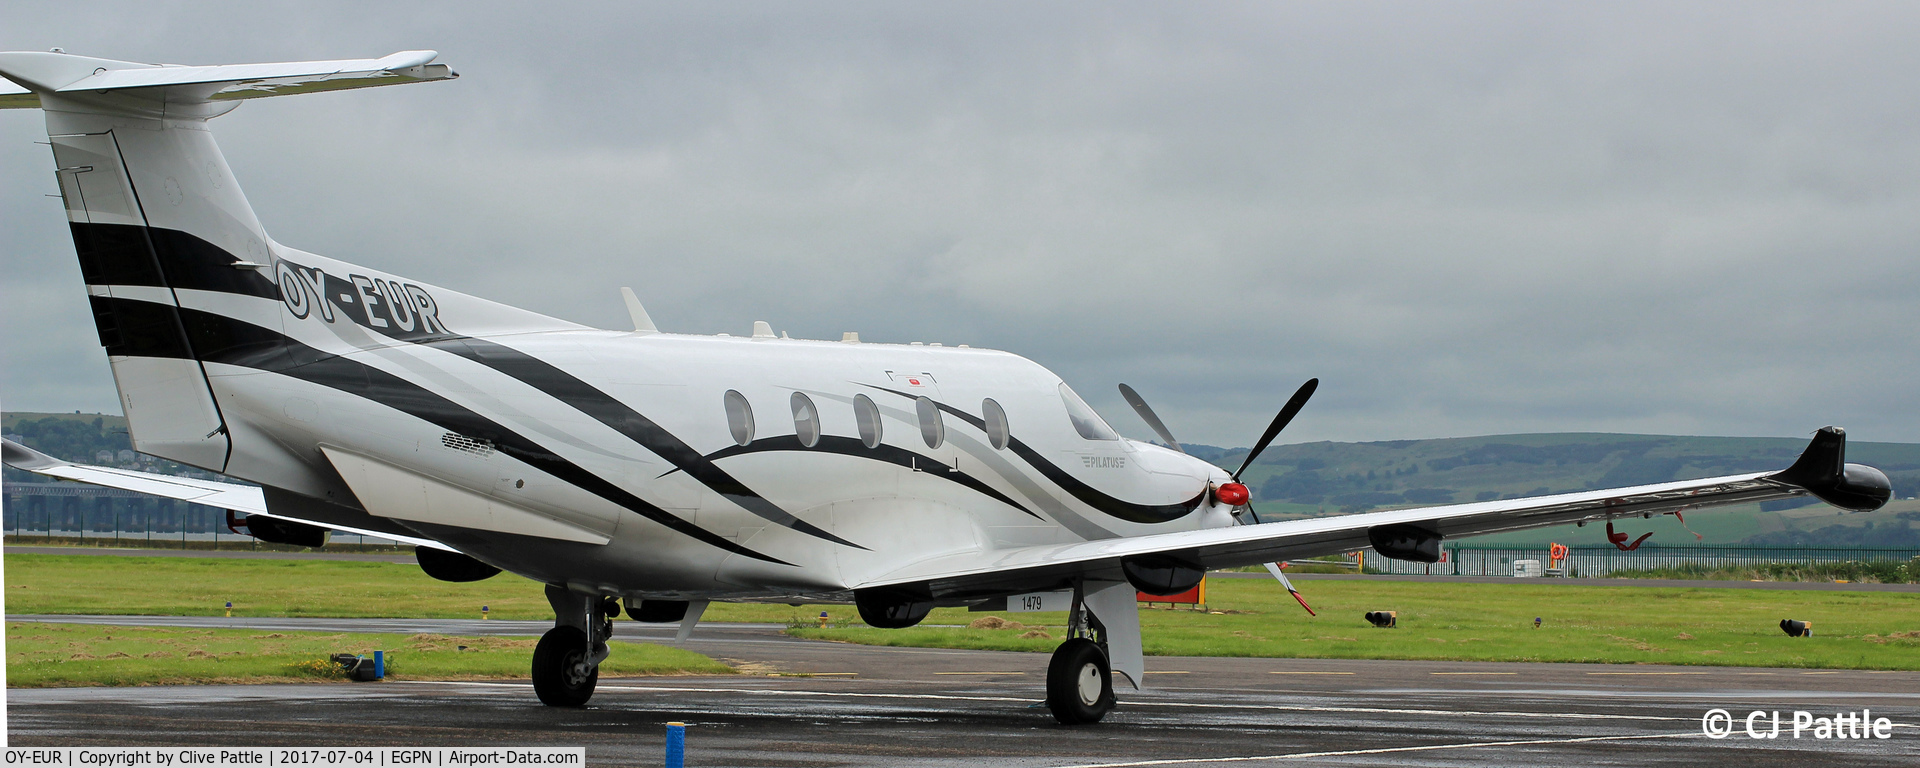 OY-EUR, 2014 Pilatus PC-12/47E C/N 1479, Parked up at Dundee